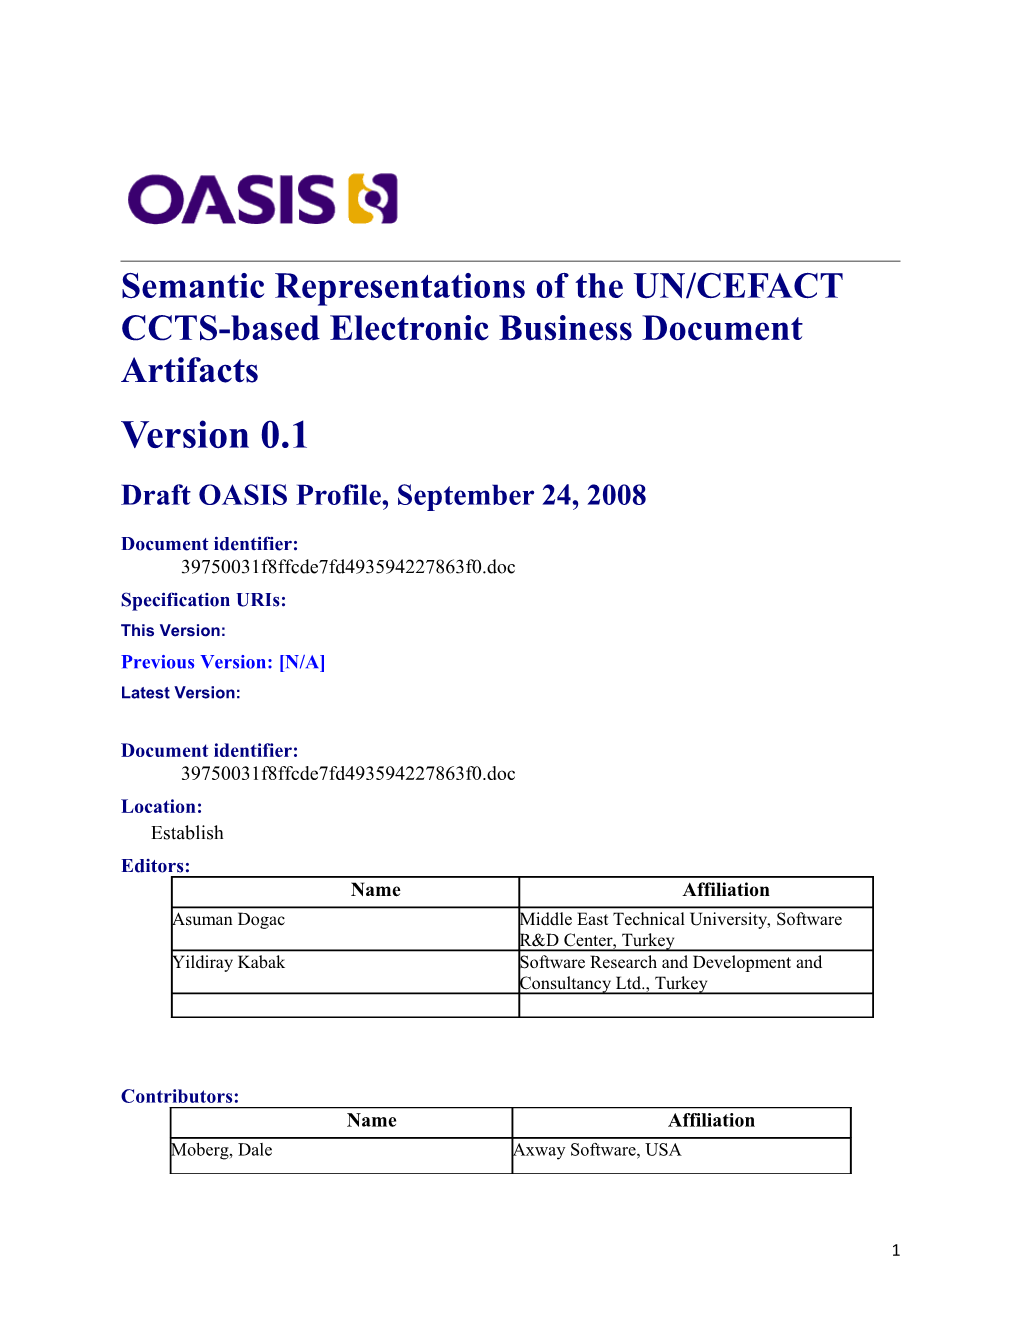 Semantic Representations of the UN/CEFACT CCTS-Based Electronic Business Document Artifacts